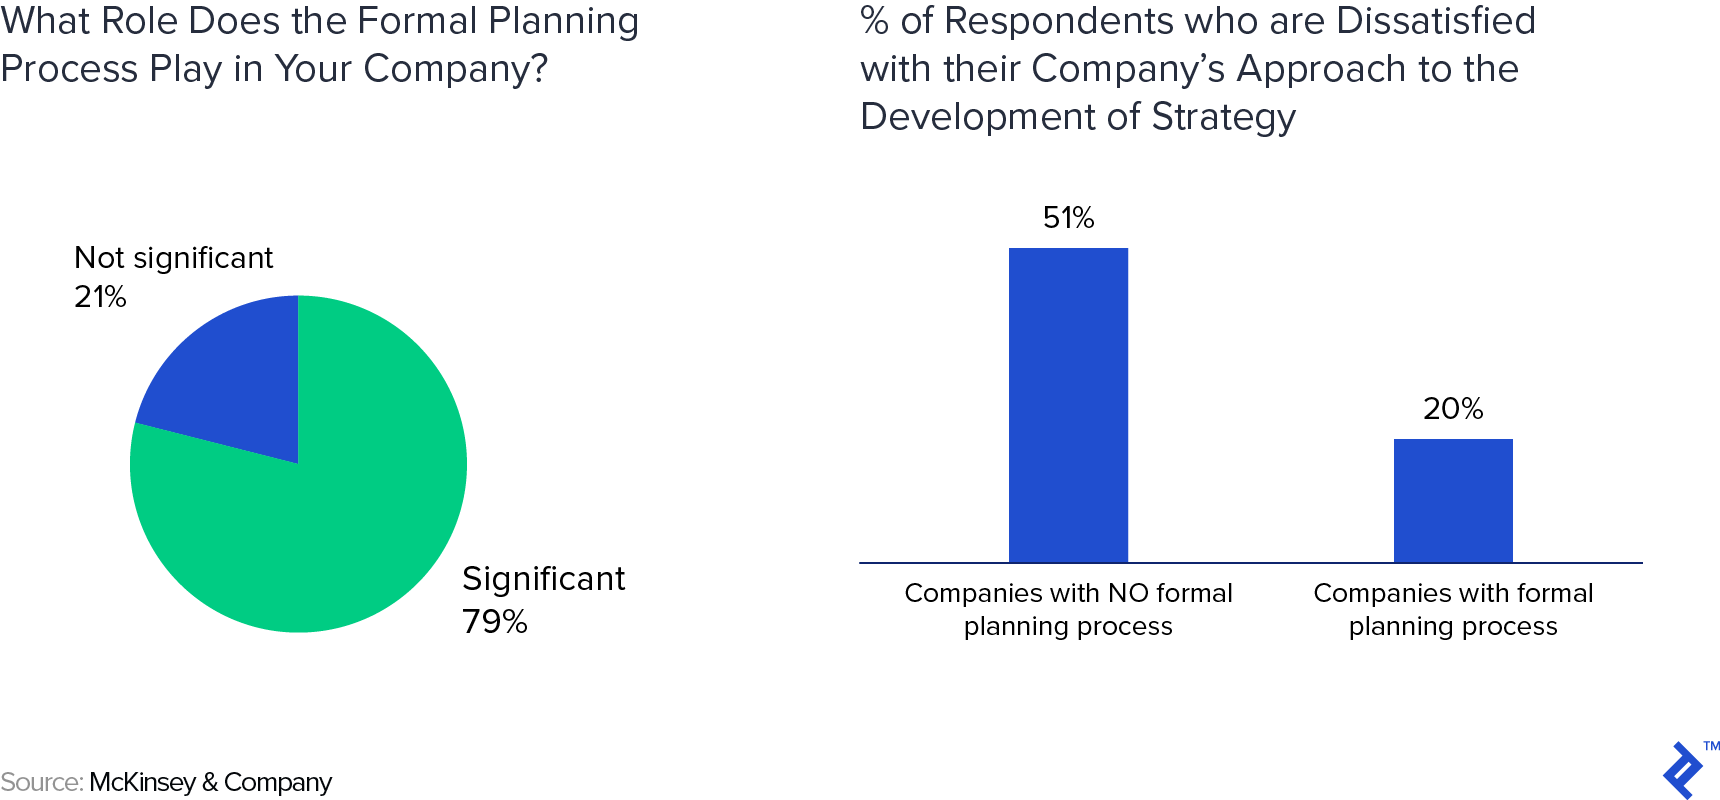 A chart of what role the formal planning process plays in a company next to a chart showing the percentage of respondents who are dissatisfied with their company's approach to the development of strategy